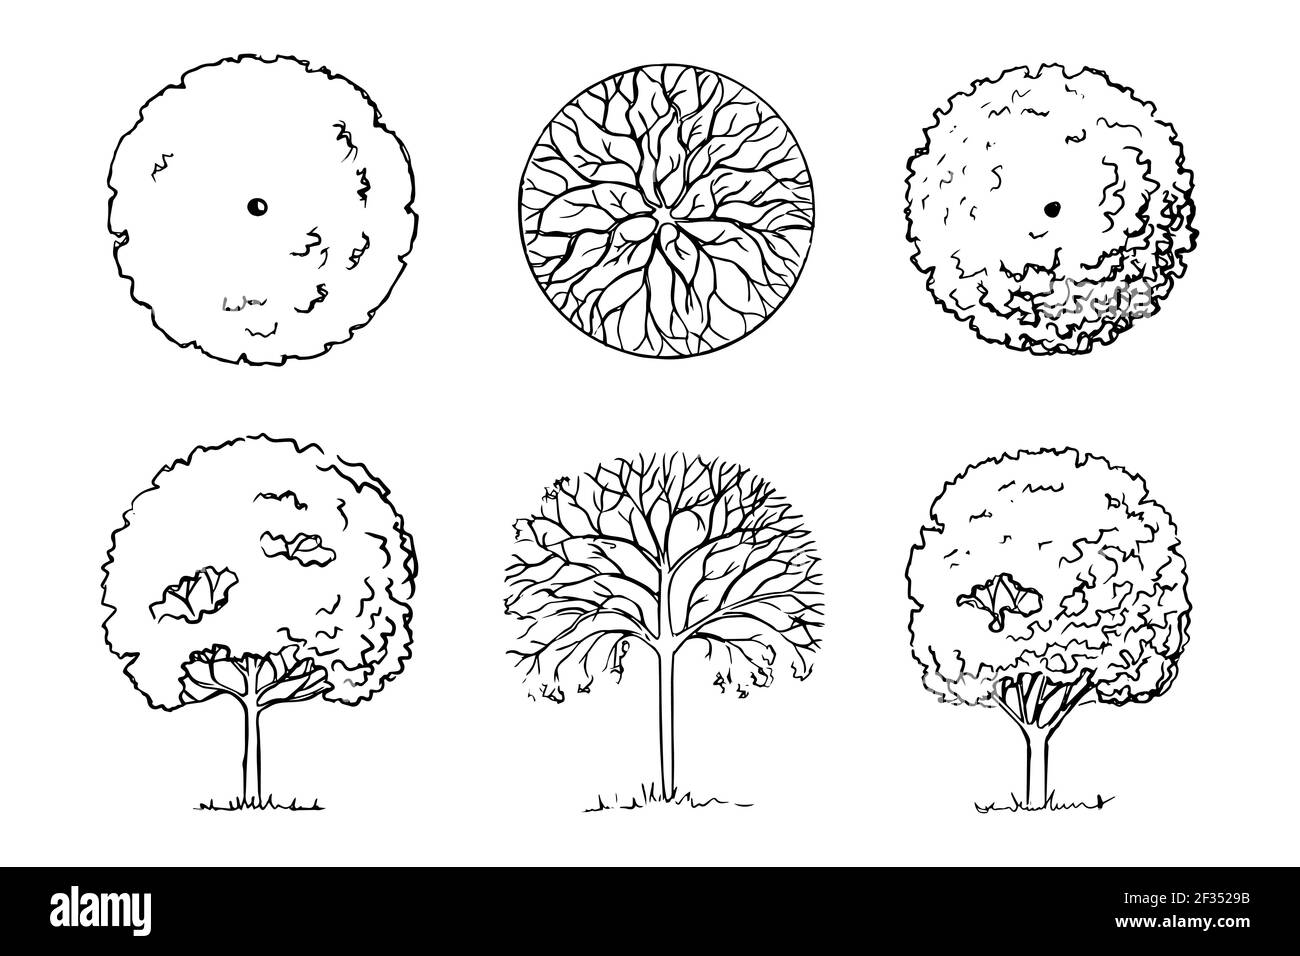 Hand-drawn sketch of trees. Landscaping. Three deciduous garden woody plants front view and top view. Black and white graphics. Isolated on a white ba Stock Vector